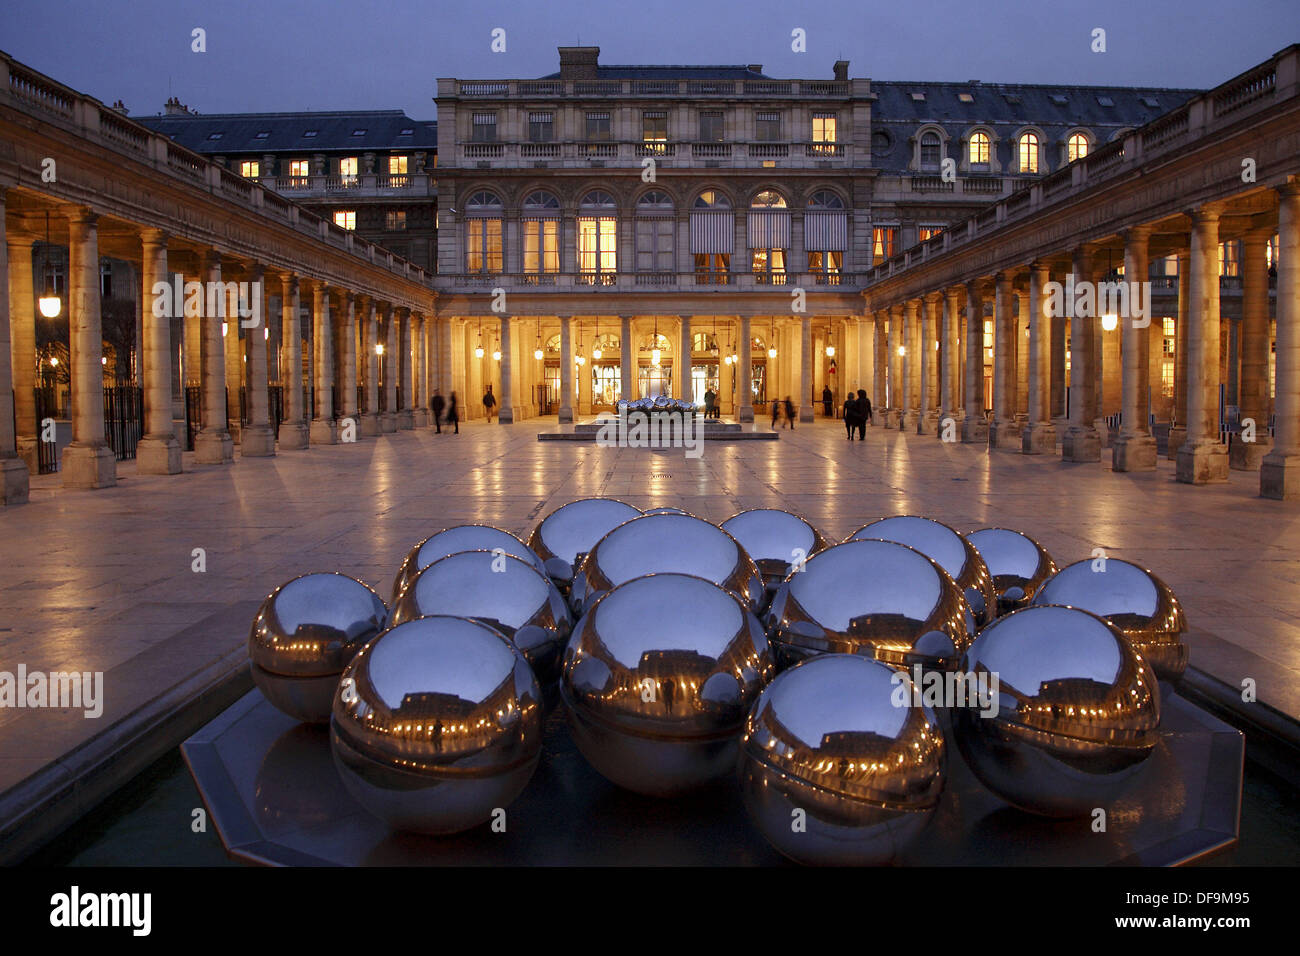 The night view of the courtyard of Palais Royal. Paris. France Stock Photo  - Alamy